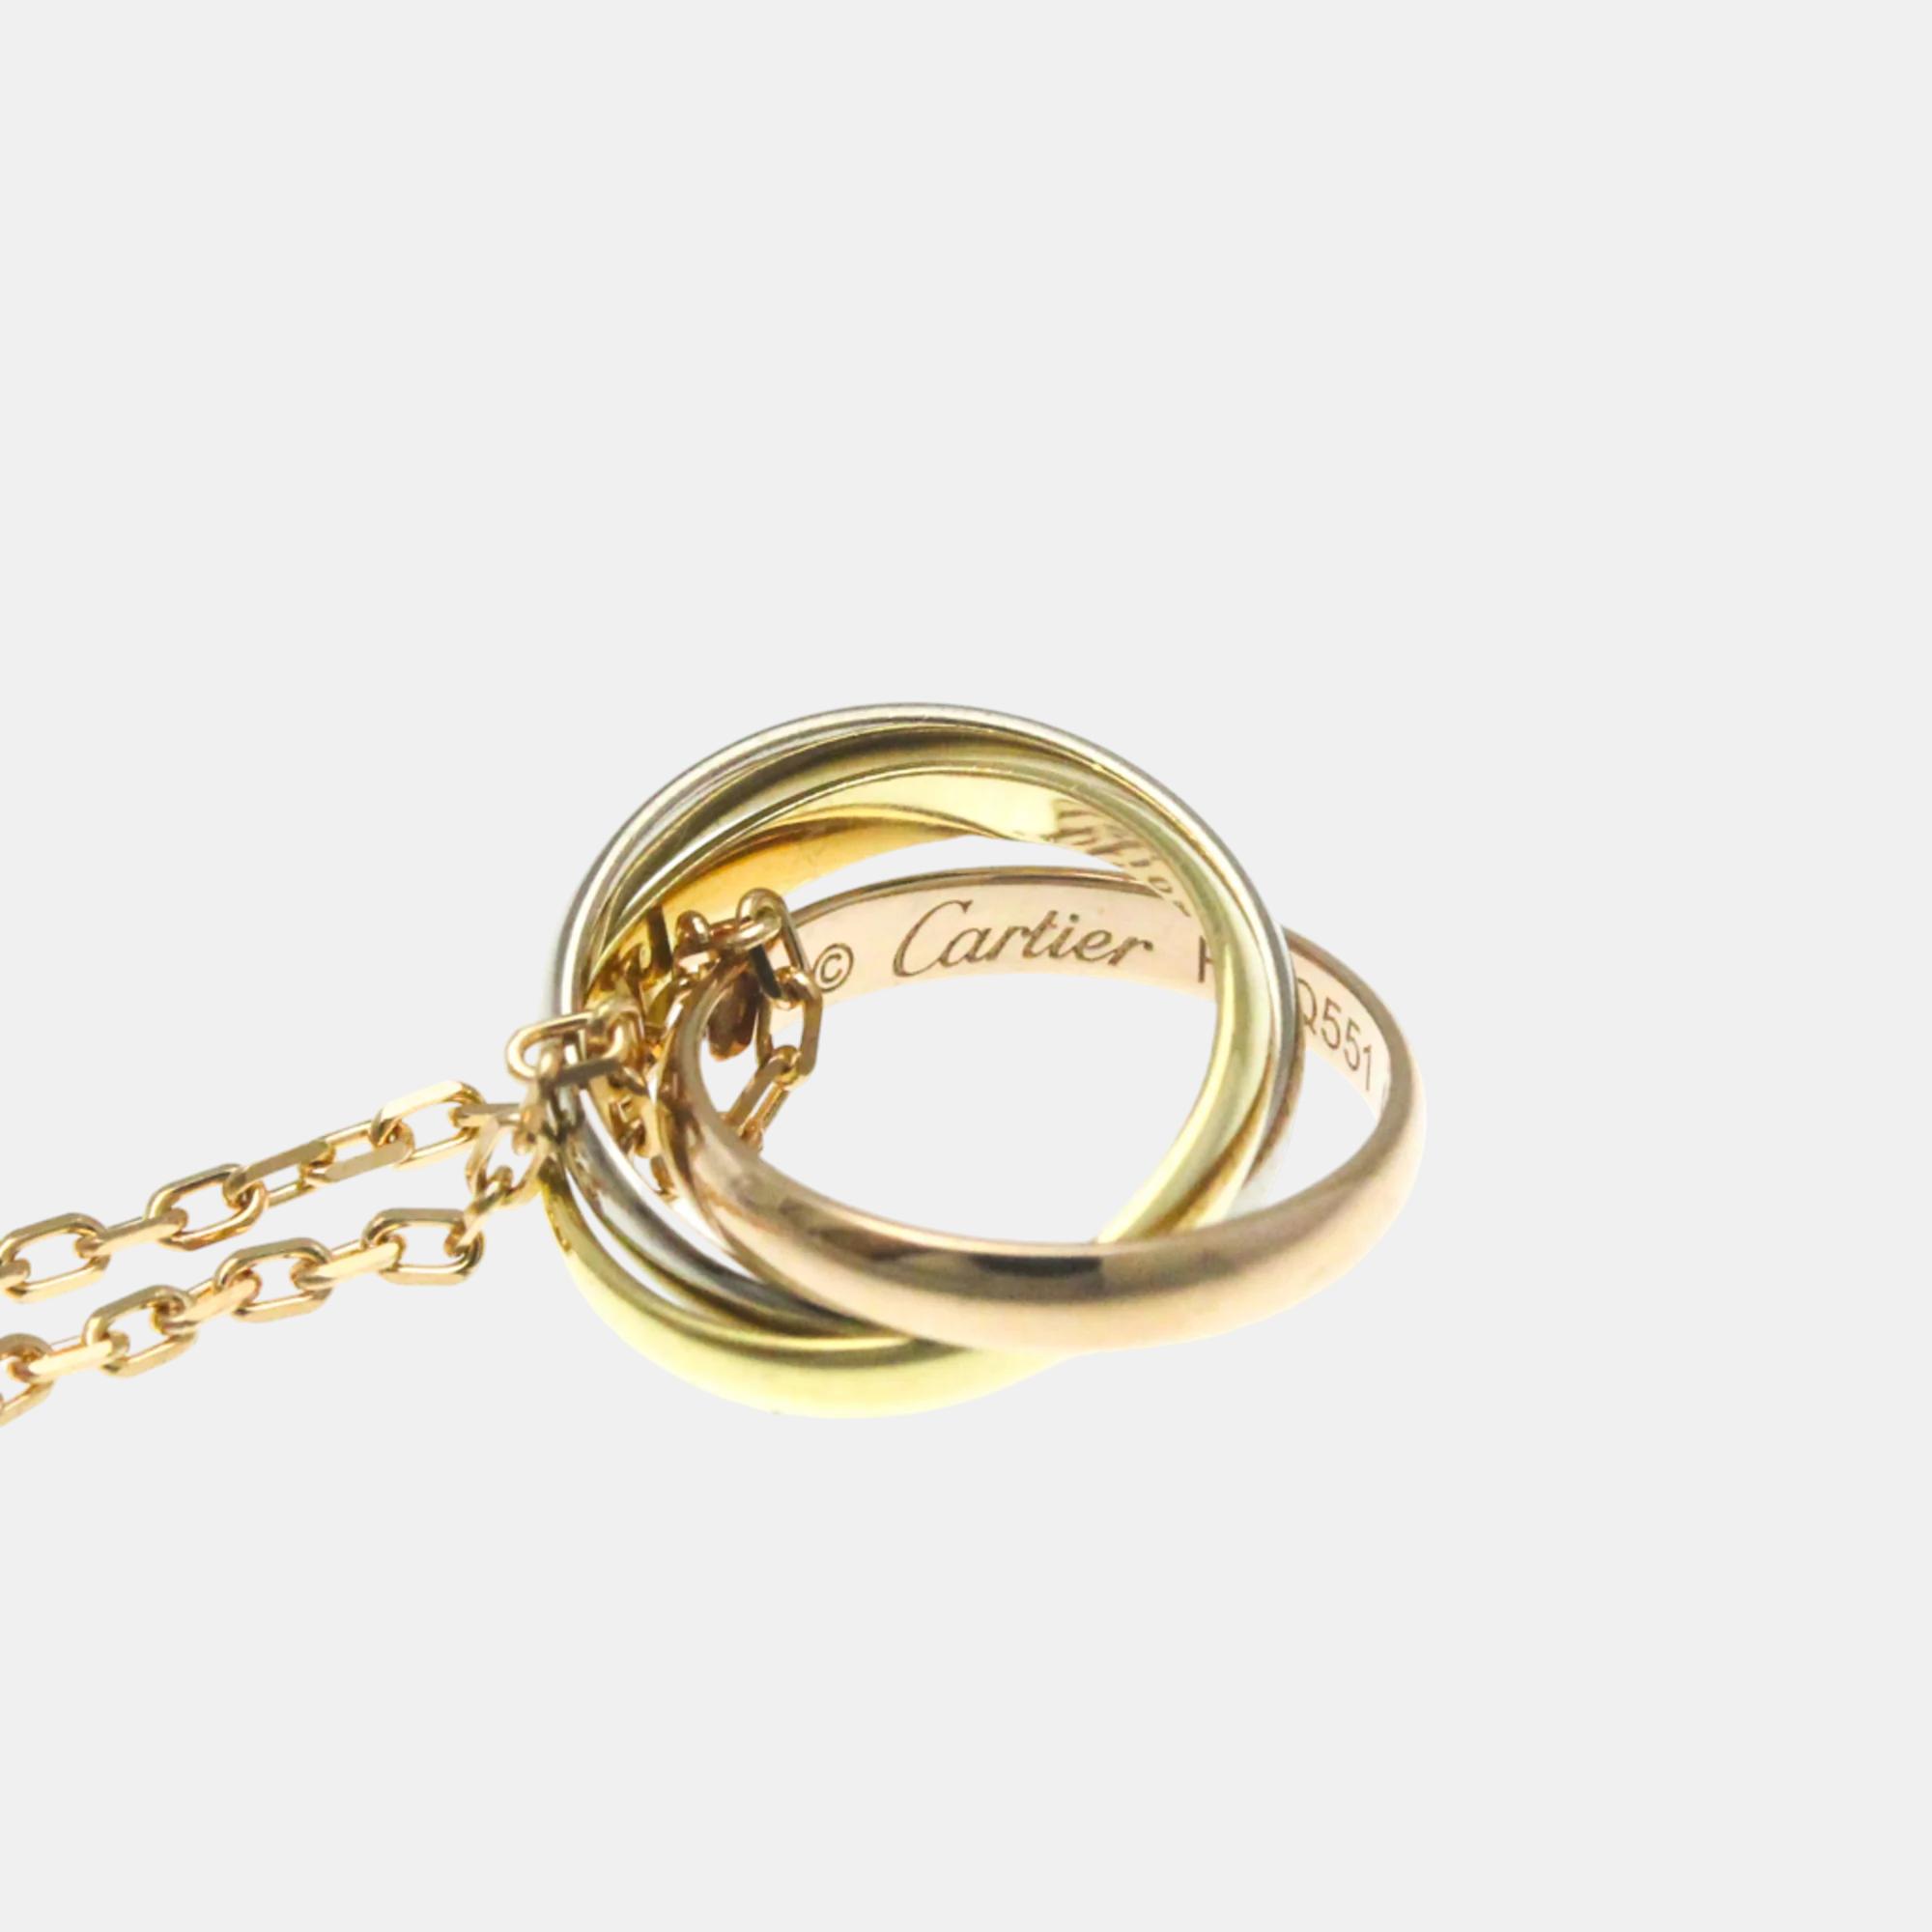 Cartier 18k yellow gold, 18k rose gold and 18k white gold trinity pendant chain necklace